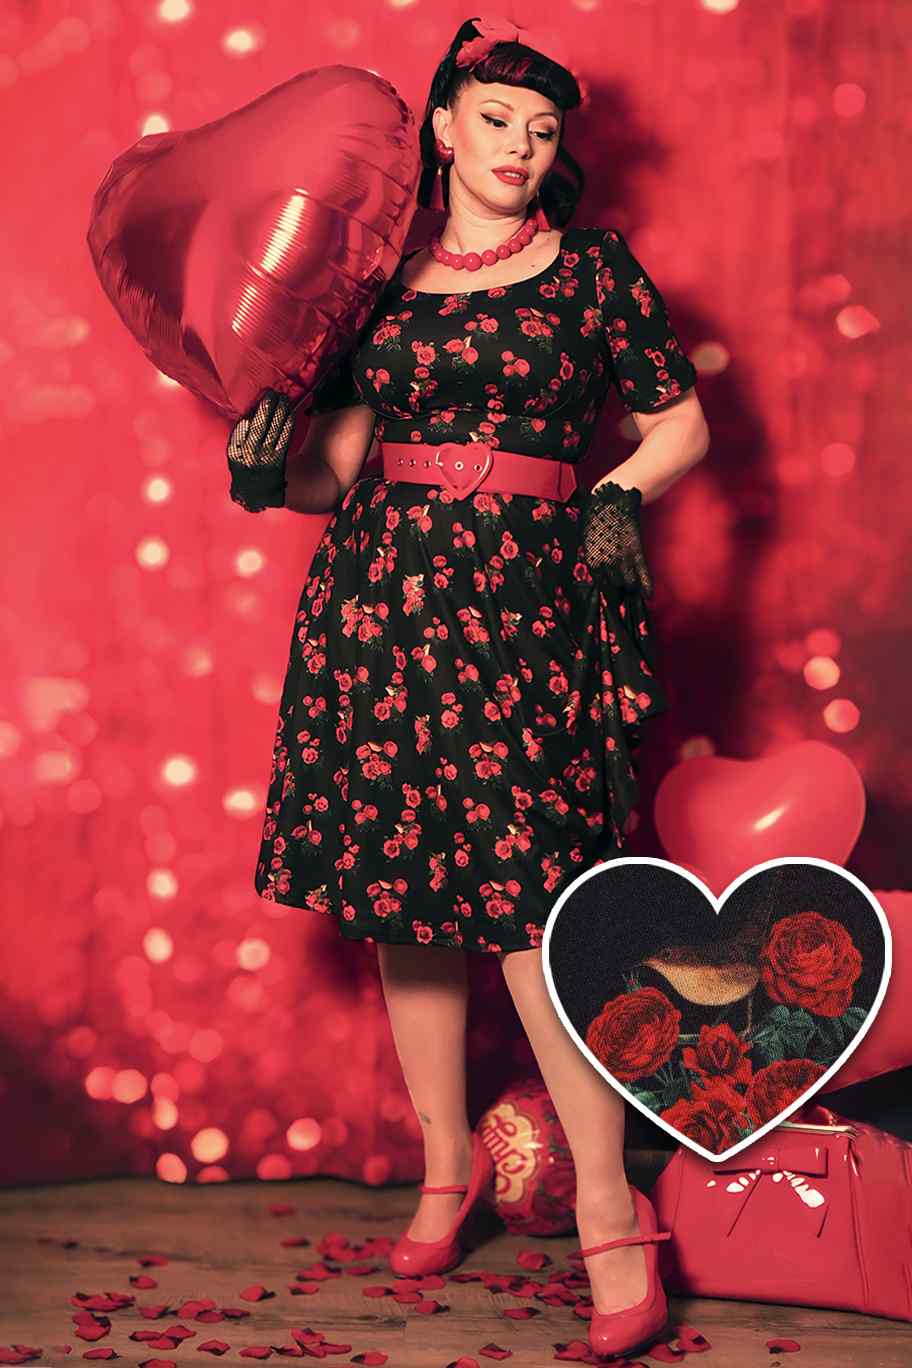 Customer wears our Brenda short sleeve dress in black red roses and birds print, with a heart balloon